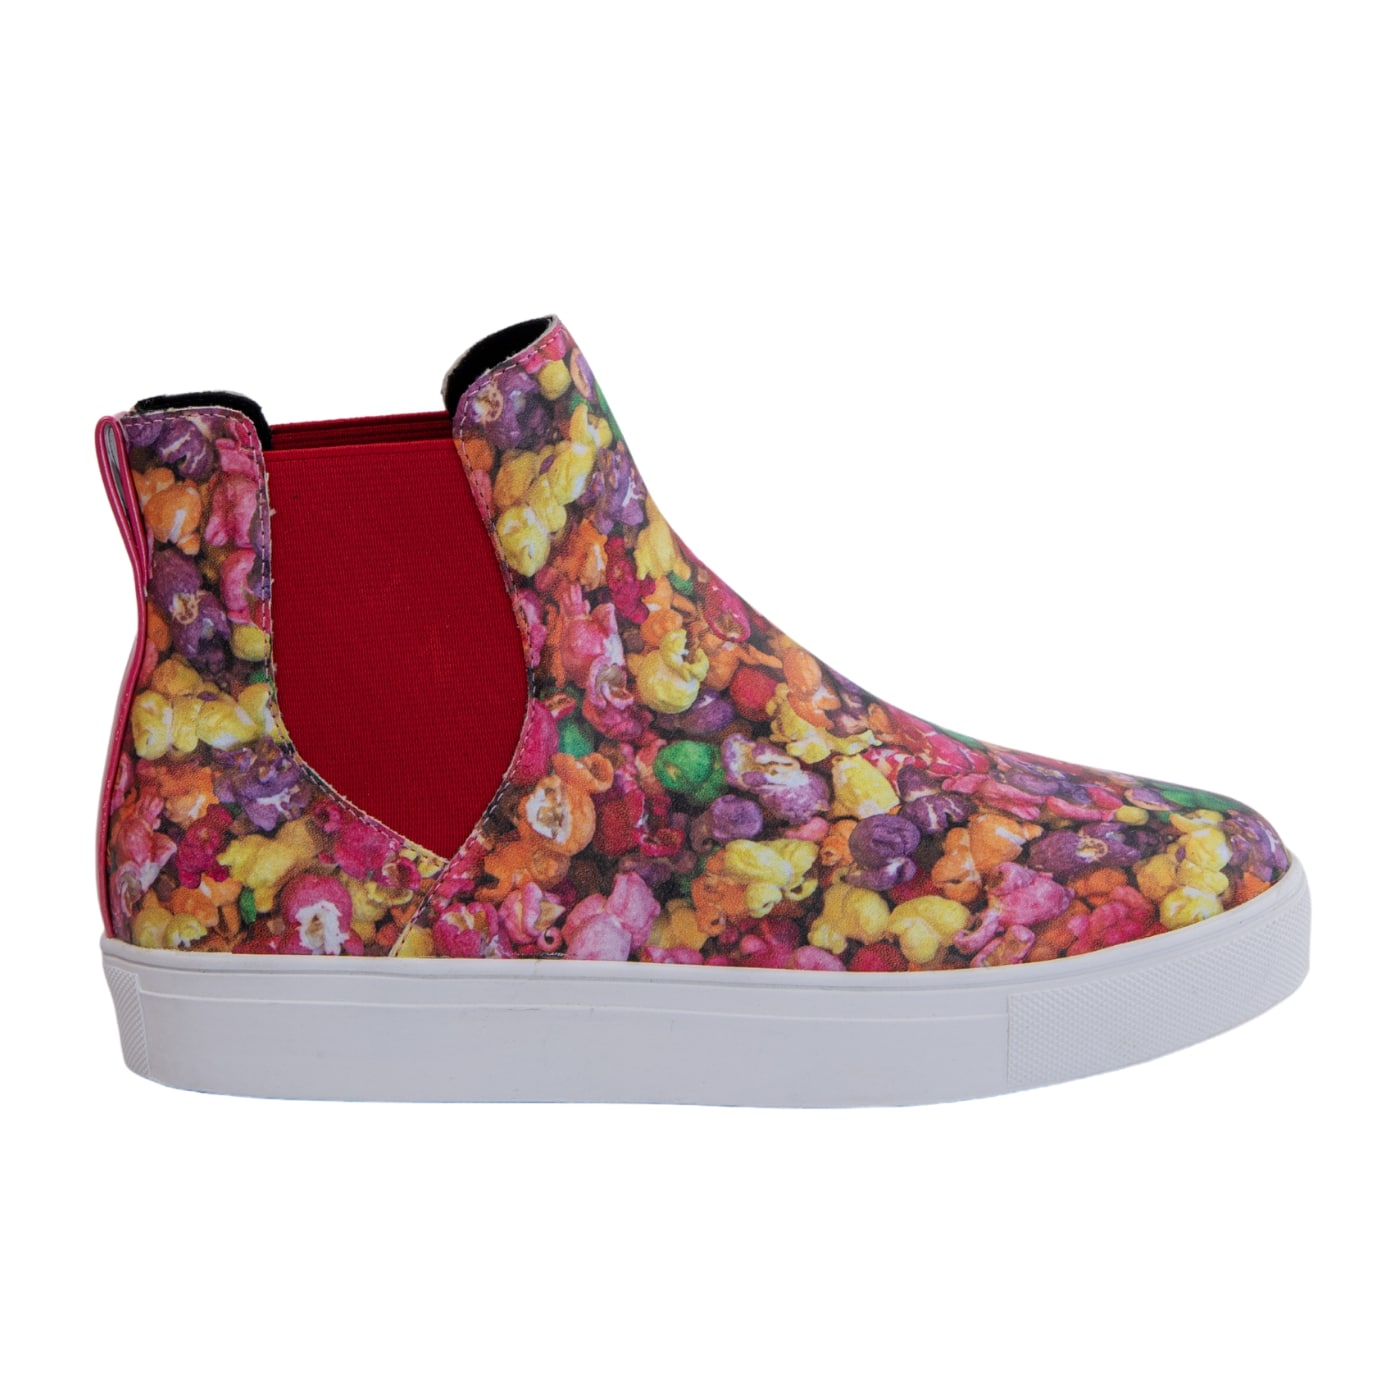 Rainbow Popcorn Hi Tops by RainbowsAndFairies.com.au (Chelsea Boots - Rainbow - Lollies - Foodie - Mismatched Shoes - Elastic Side Boots) - SKU: FW_HITOP_PCORN_ORG - Pic-03